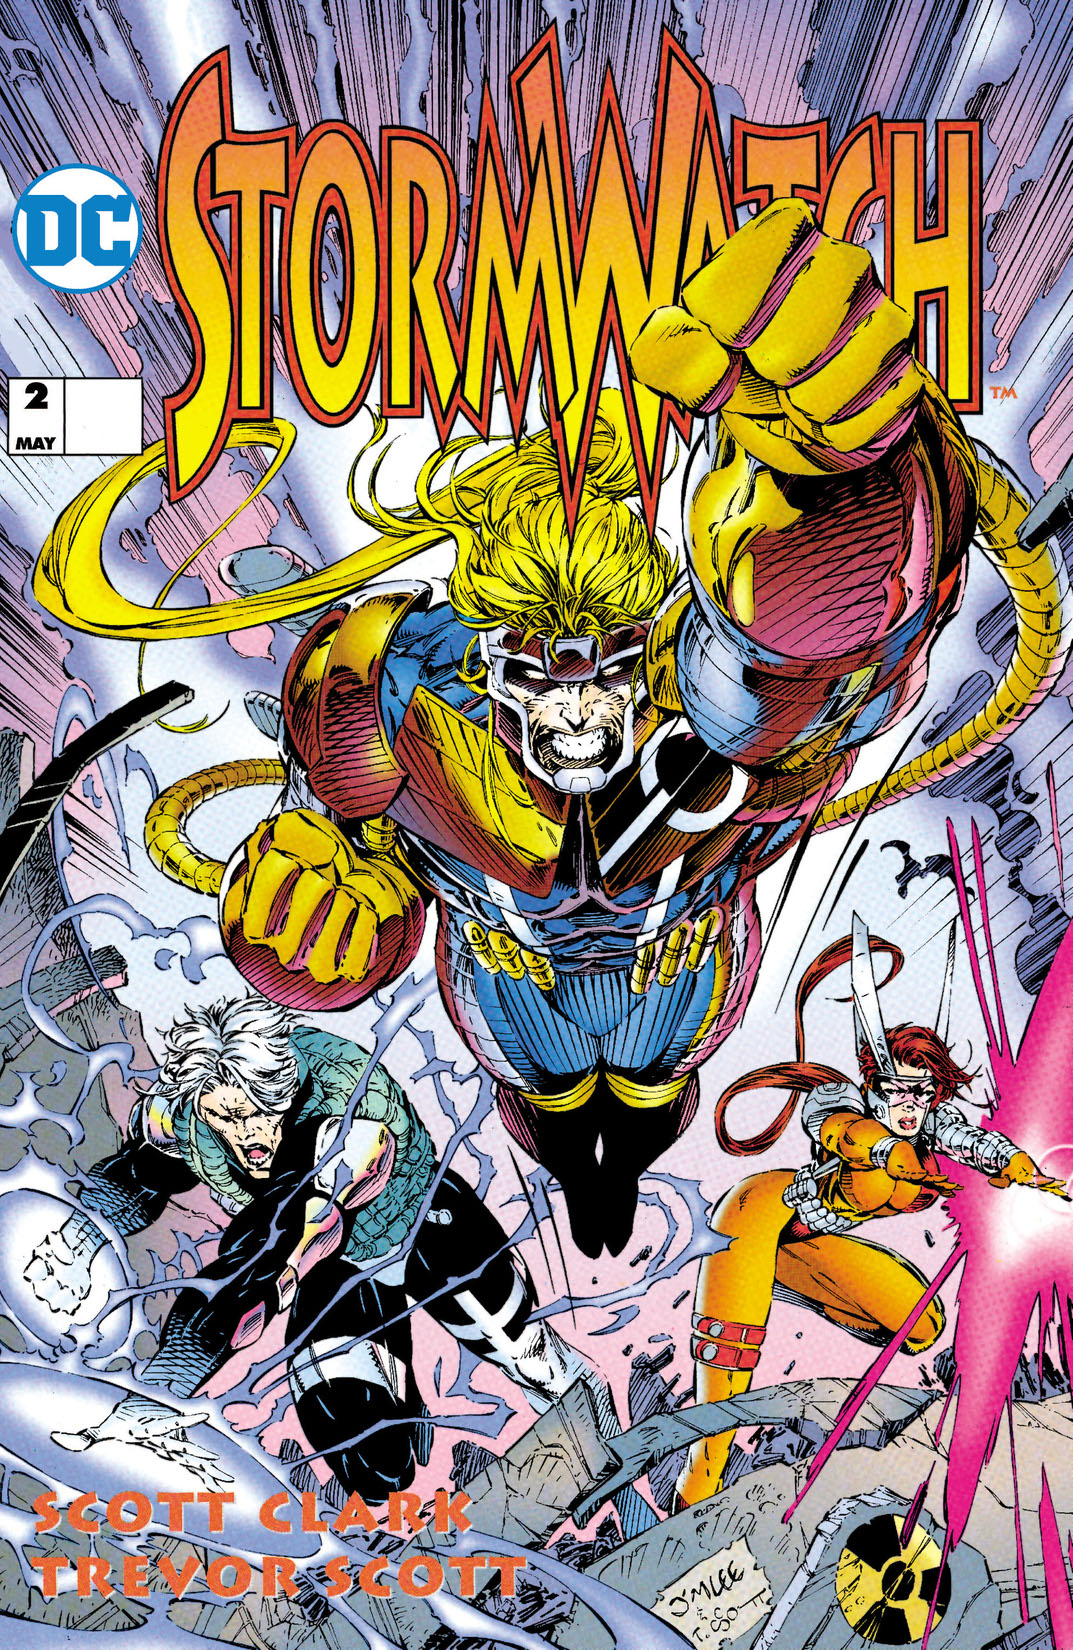 Stormwatch (1993-1997) #2 preview images